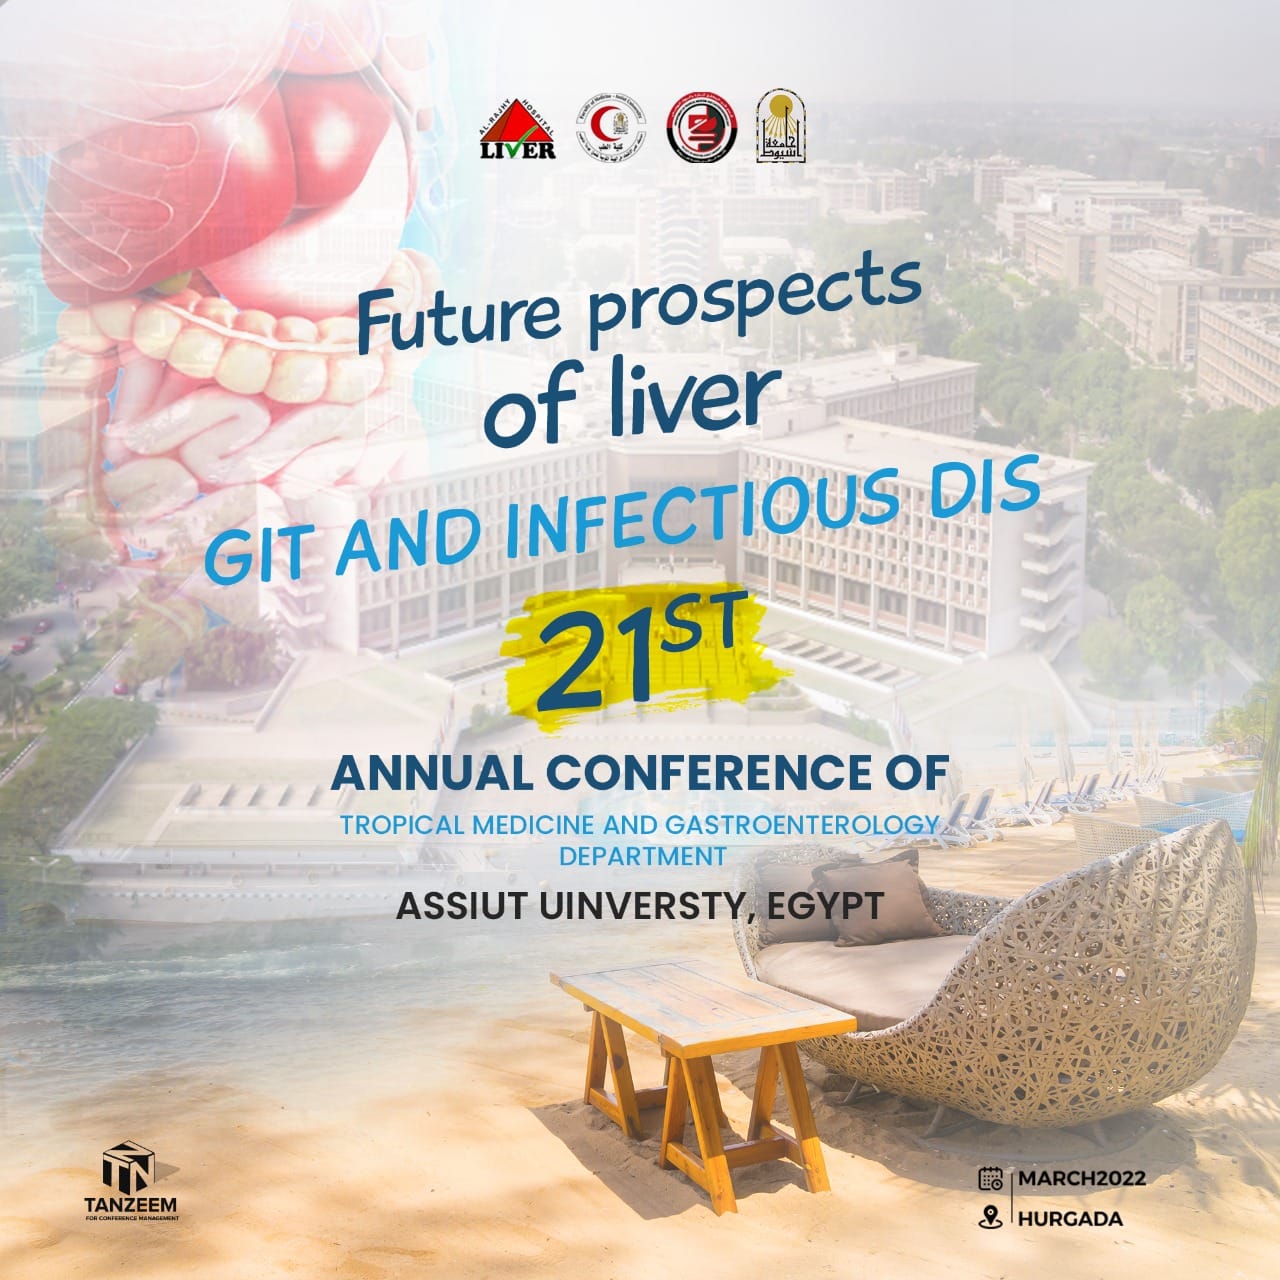 21st Annual Conference of Tropical Medicine and Gastroenterology Department, Assiut University